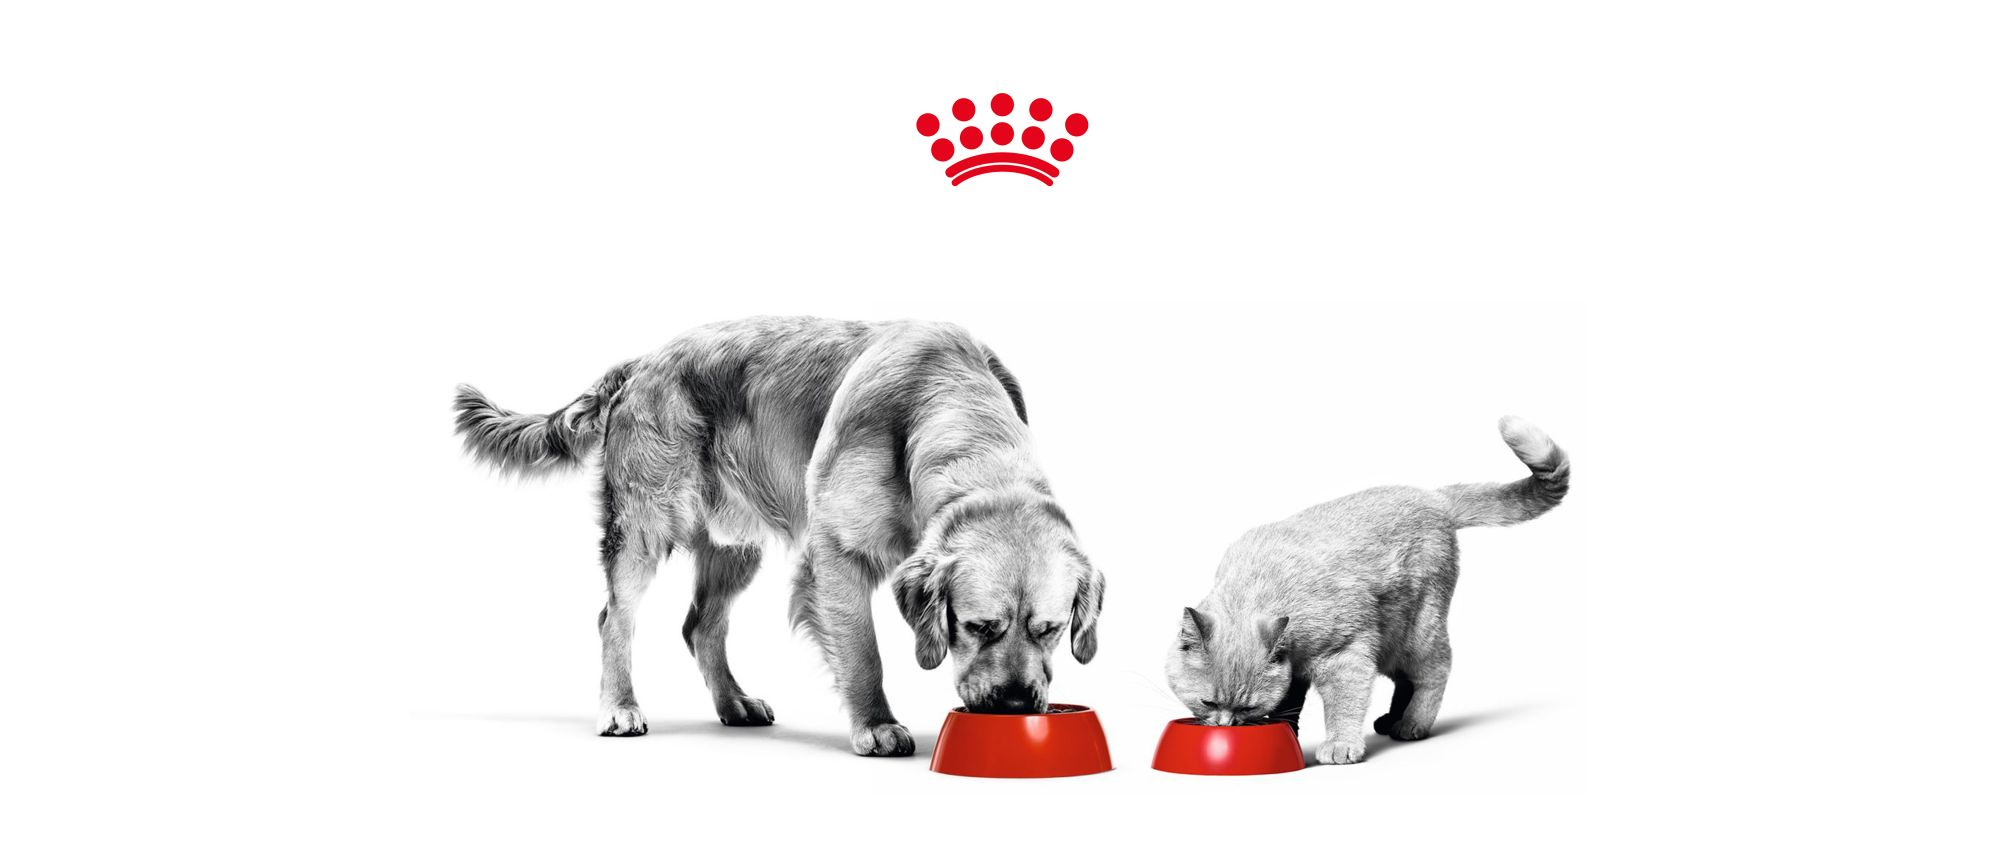 ROYAL CANIN® named Jollyes' food business partner of the year